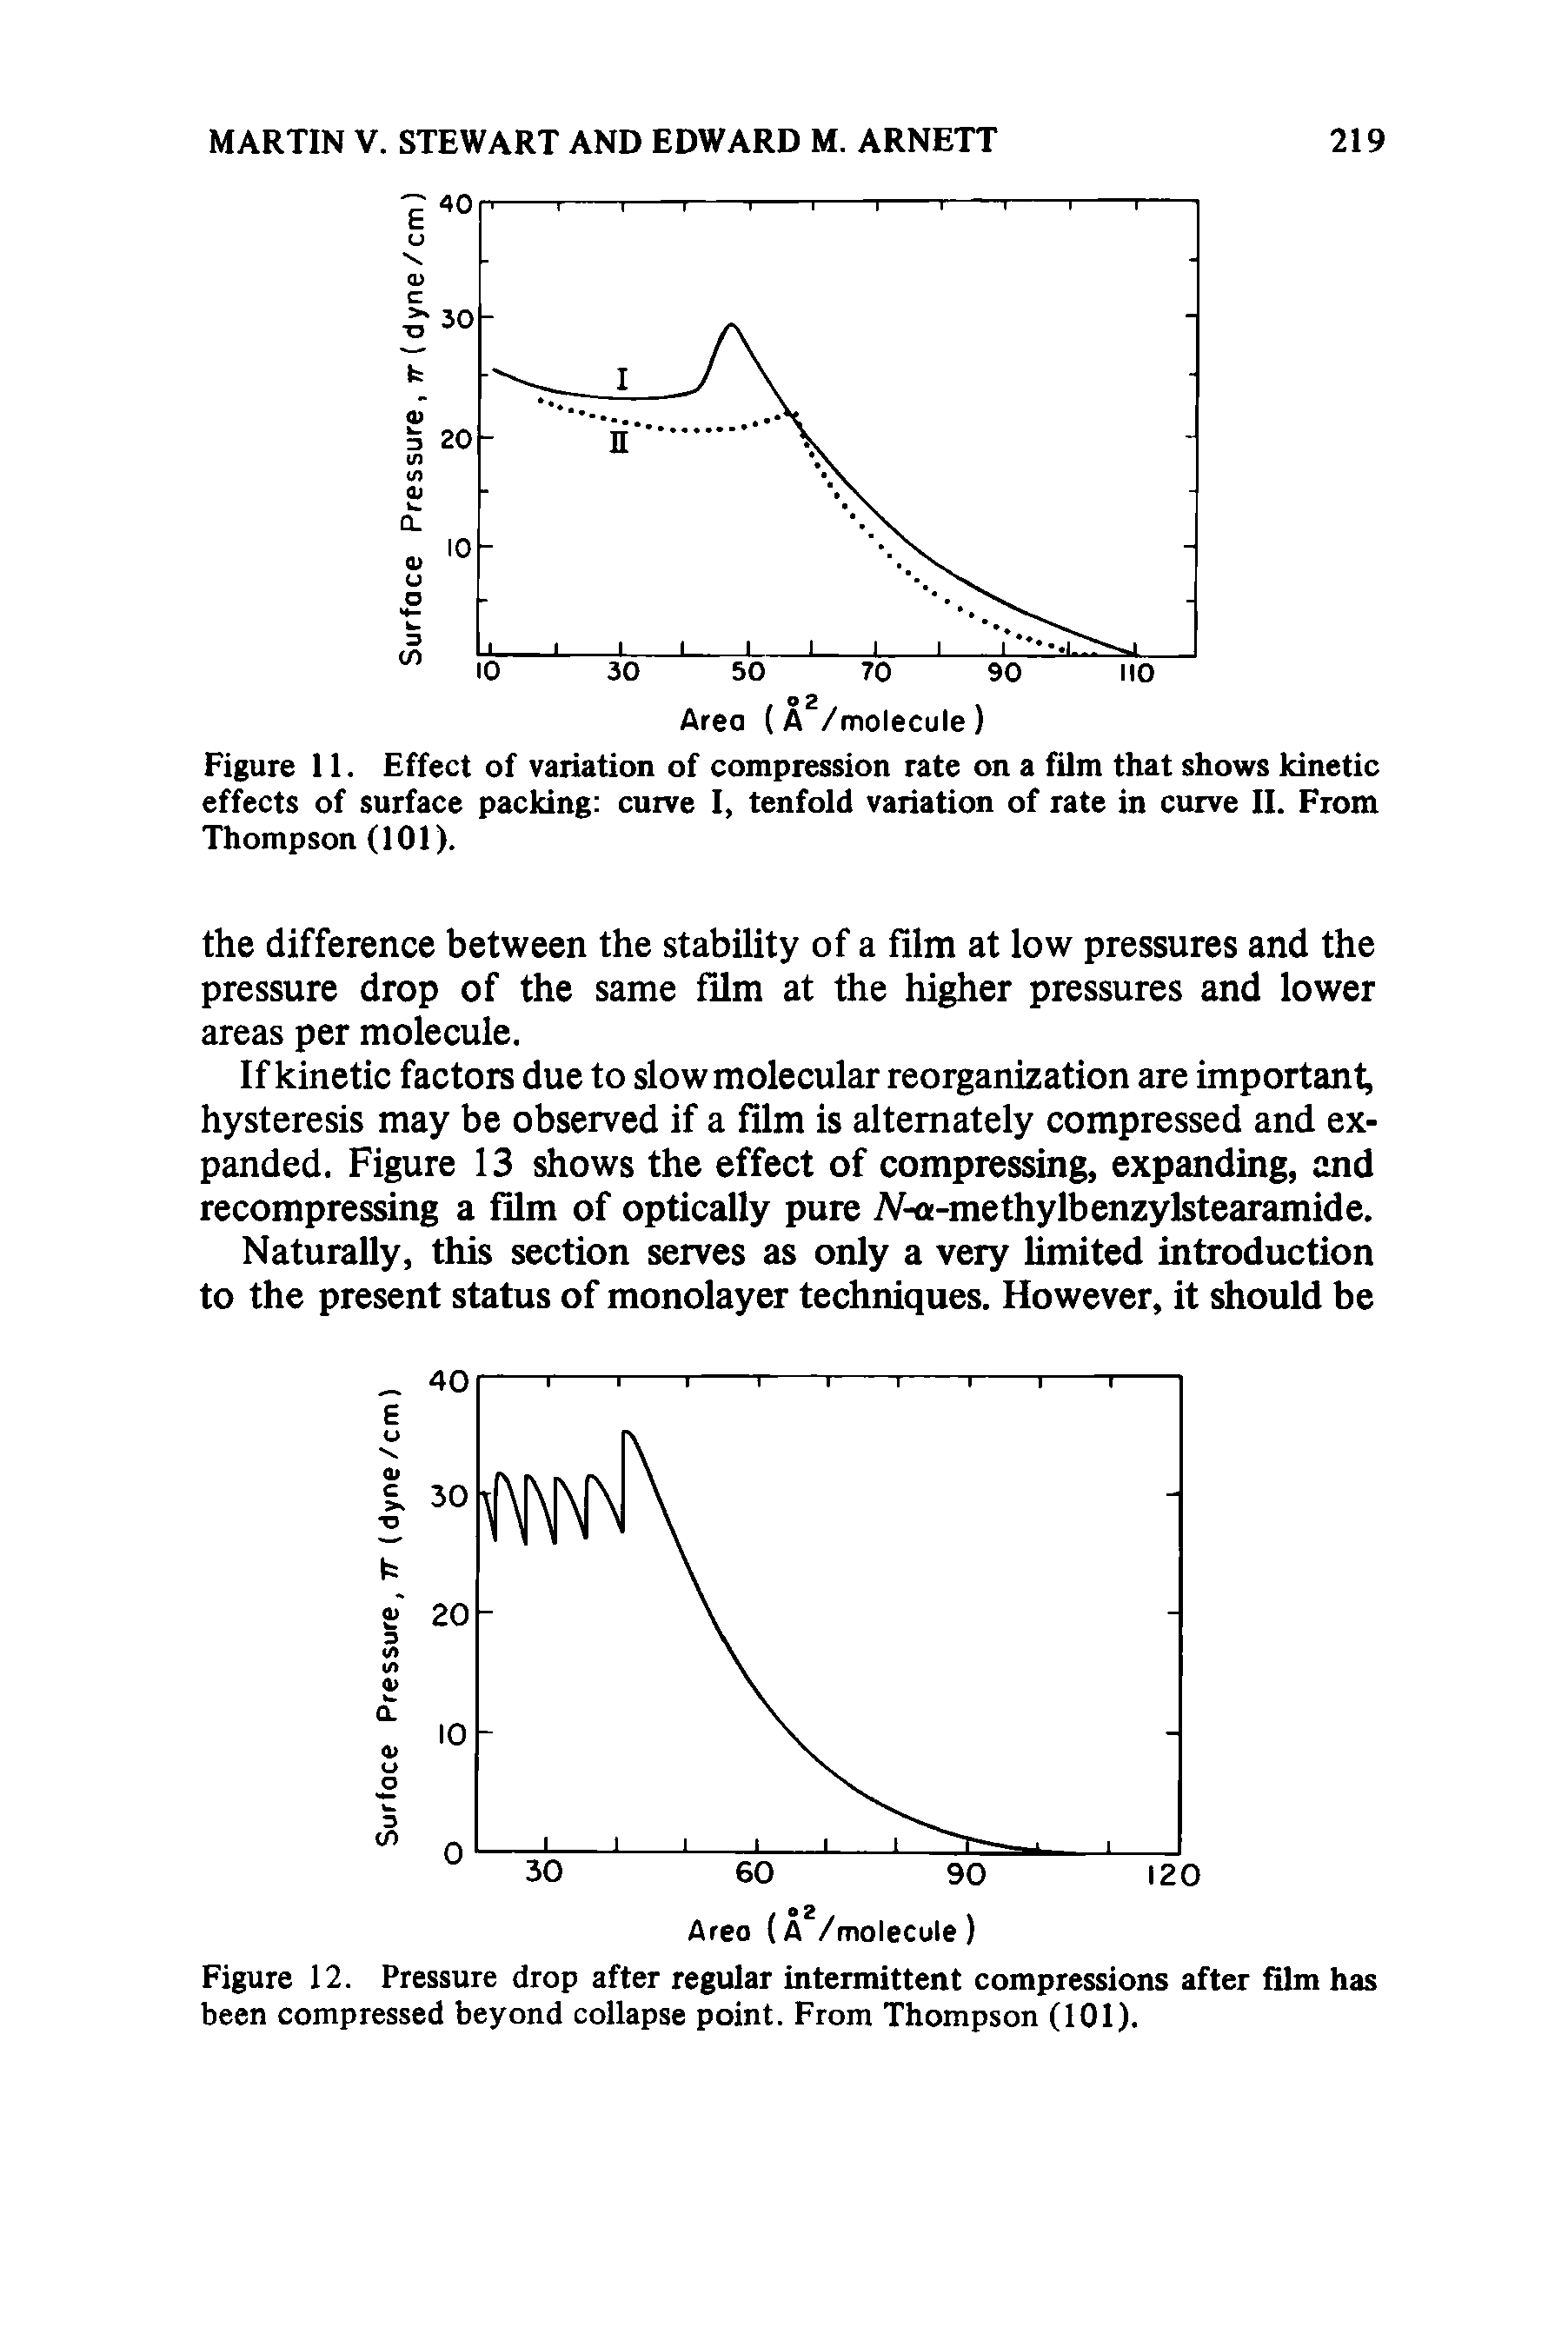 Figure 11. Effect of variation of compression rate on a film that shows kinetic effects of surface packing curve I, tenfold variation of rate in curve II. From Thompson (101).